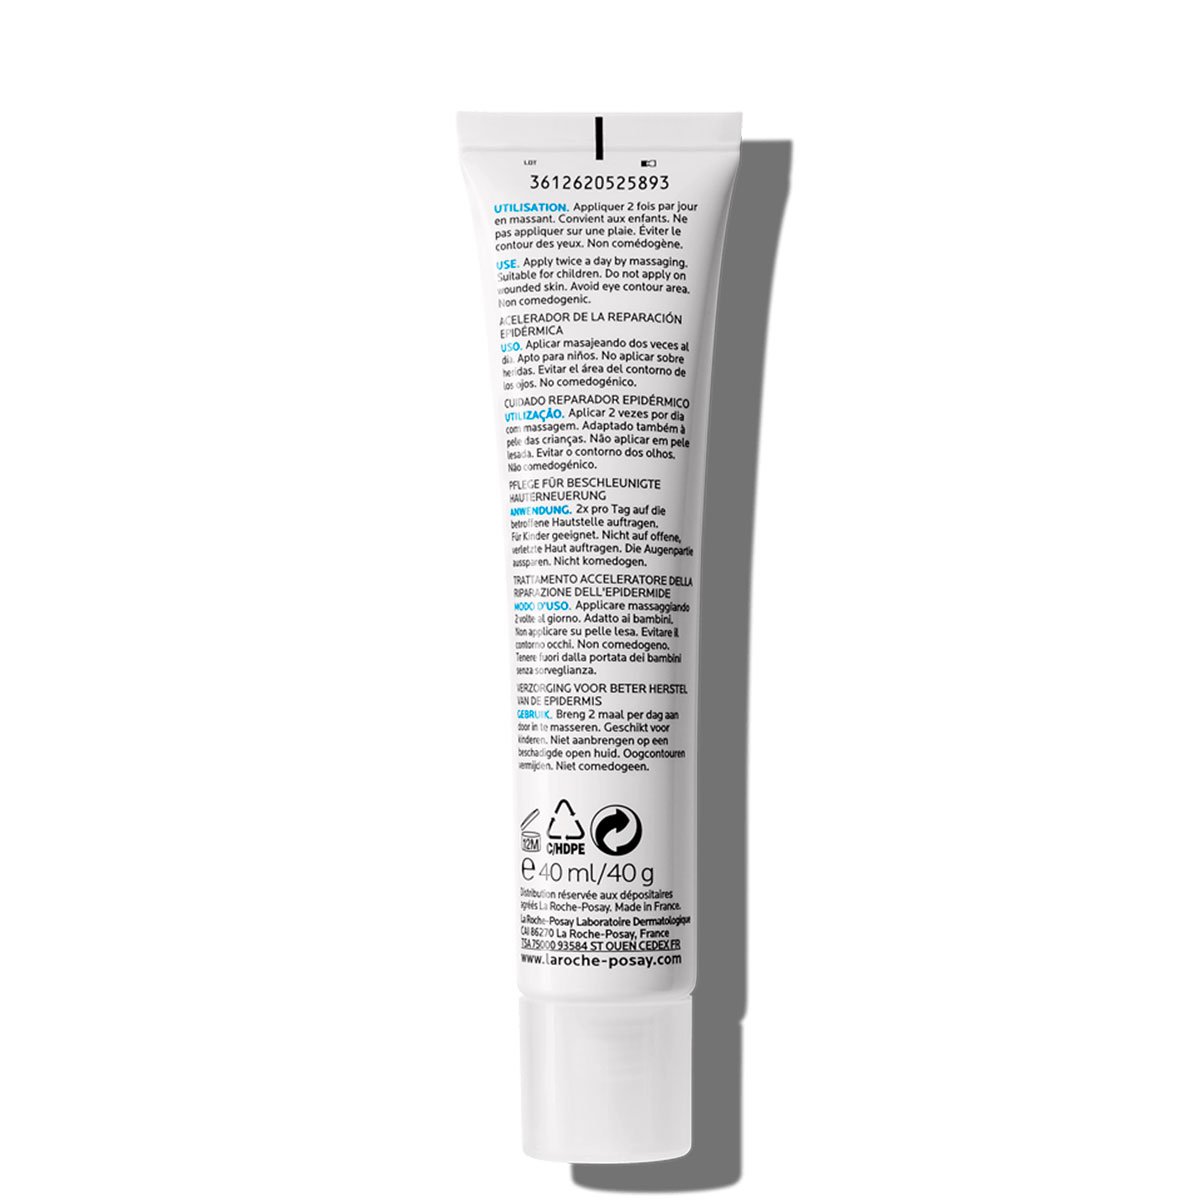 La Roche Posay ProductPage Damaged Cicaplast Gel B5 Pro Recovery 40ml 